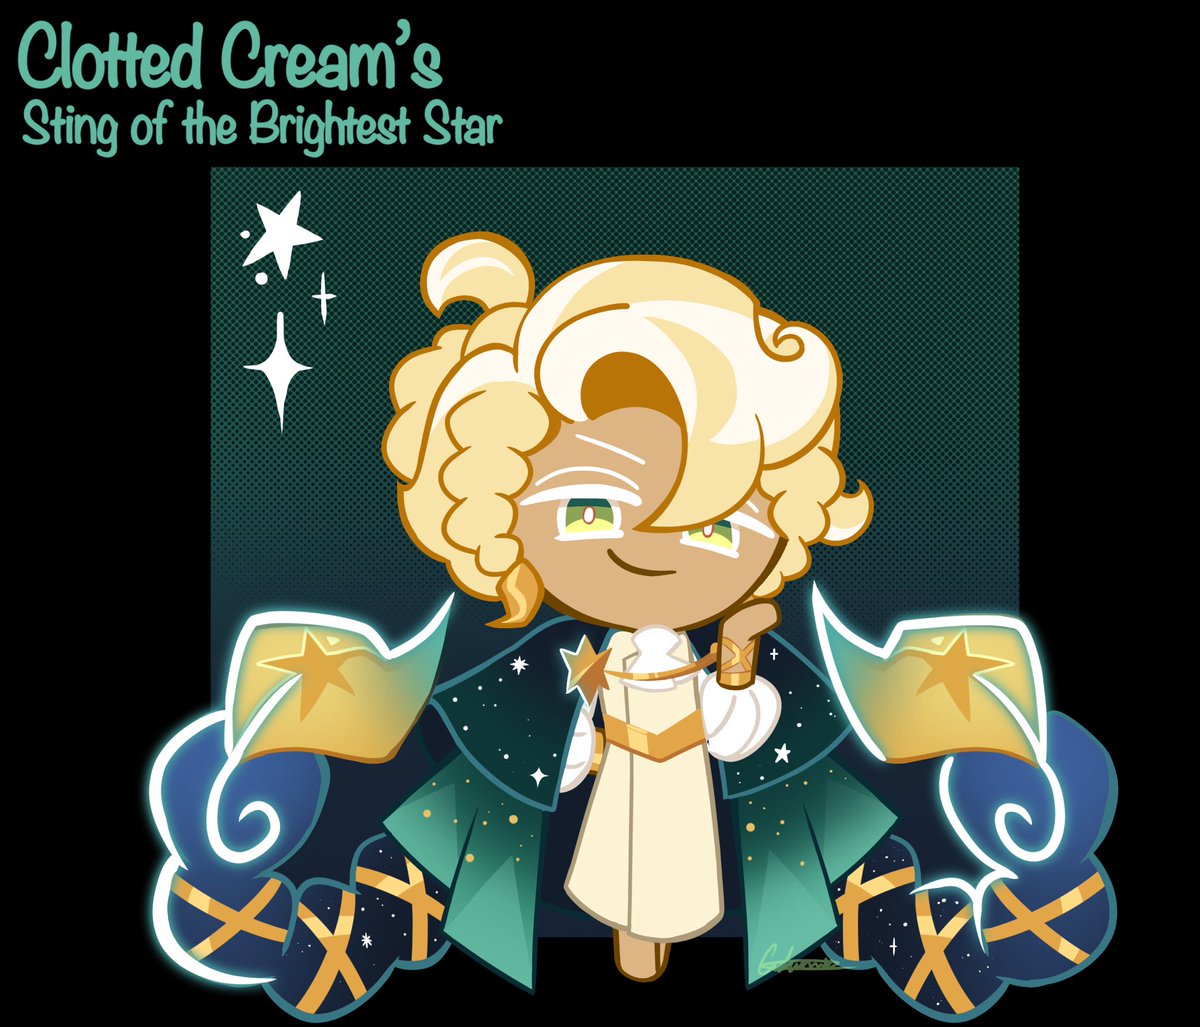 Another one done!

Star Dreamer #clottedcreamcookie costume!